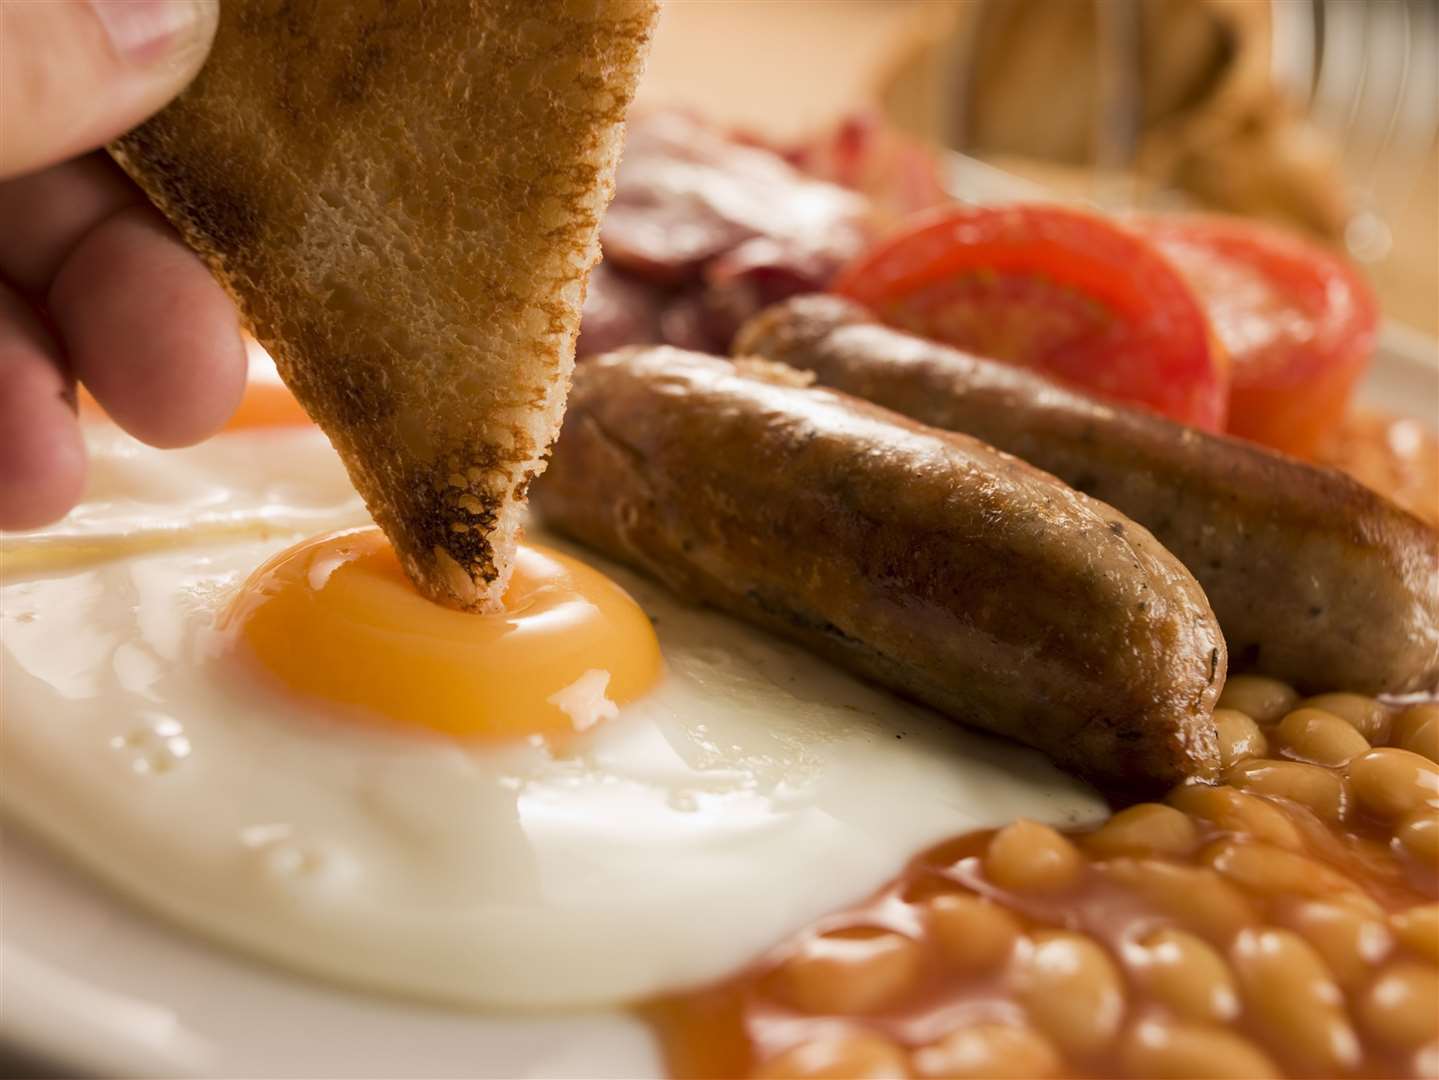 A full English breakfast. Picture: Thinkstock Image Library